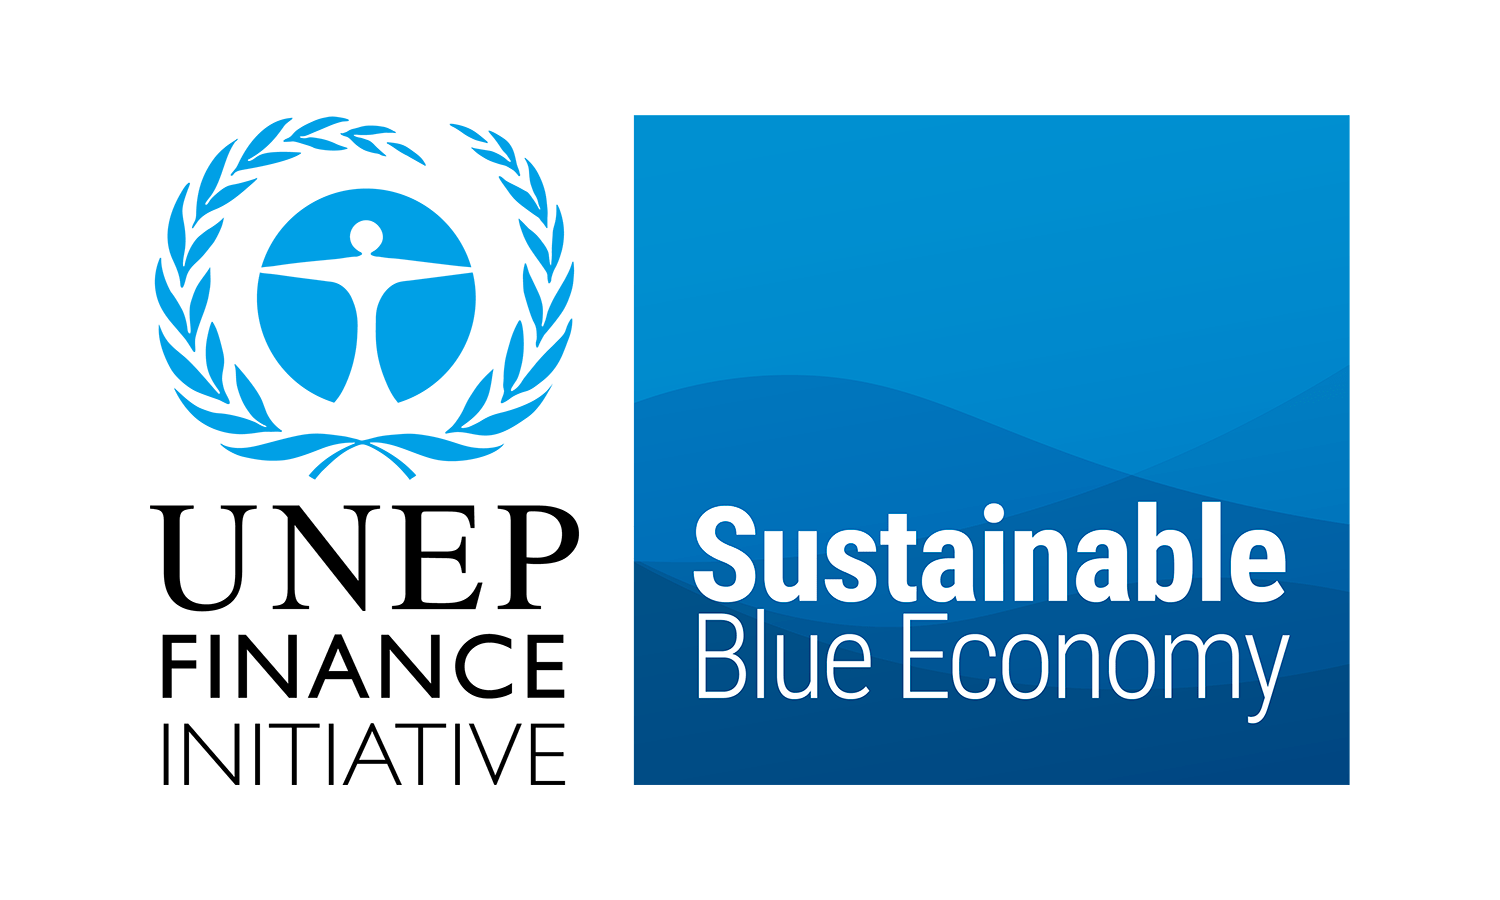 Sustainable Blue Economy Office opens in Umm Al Quwain